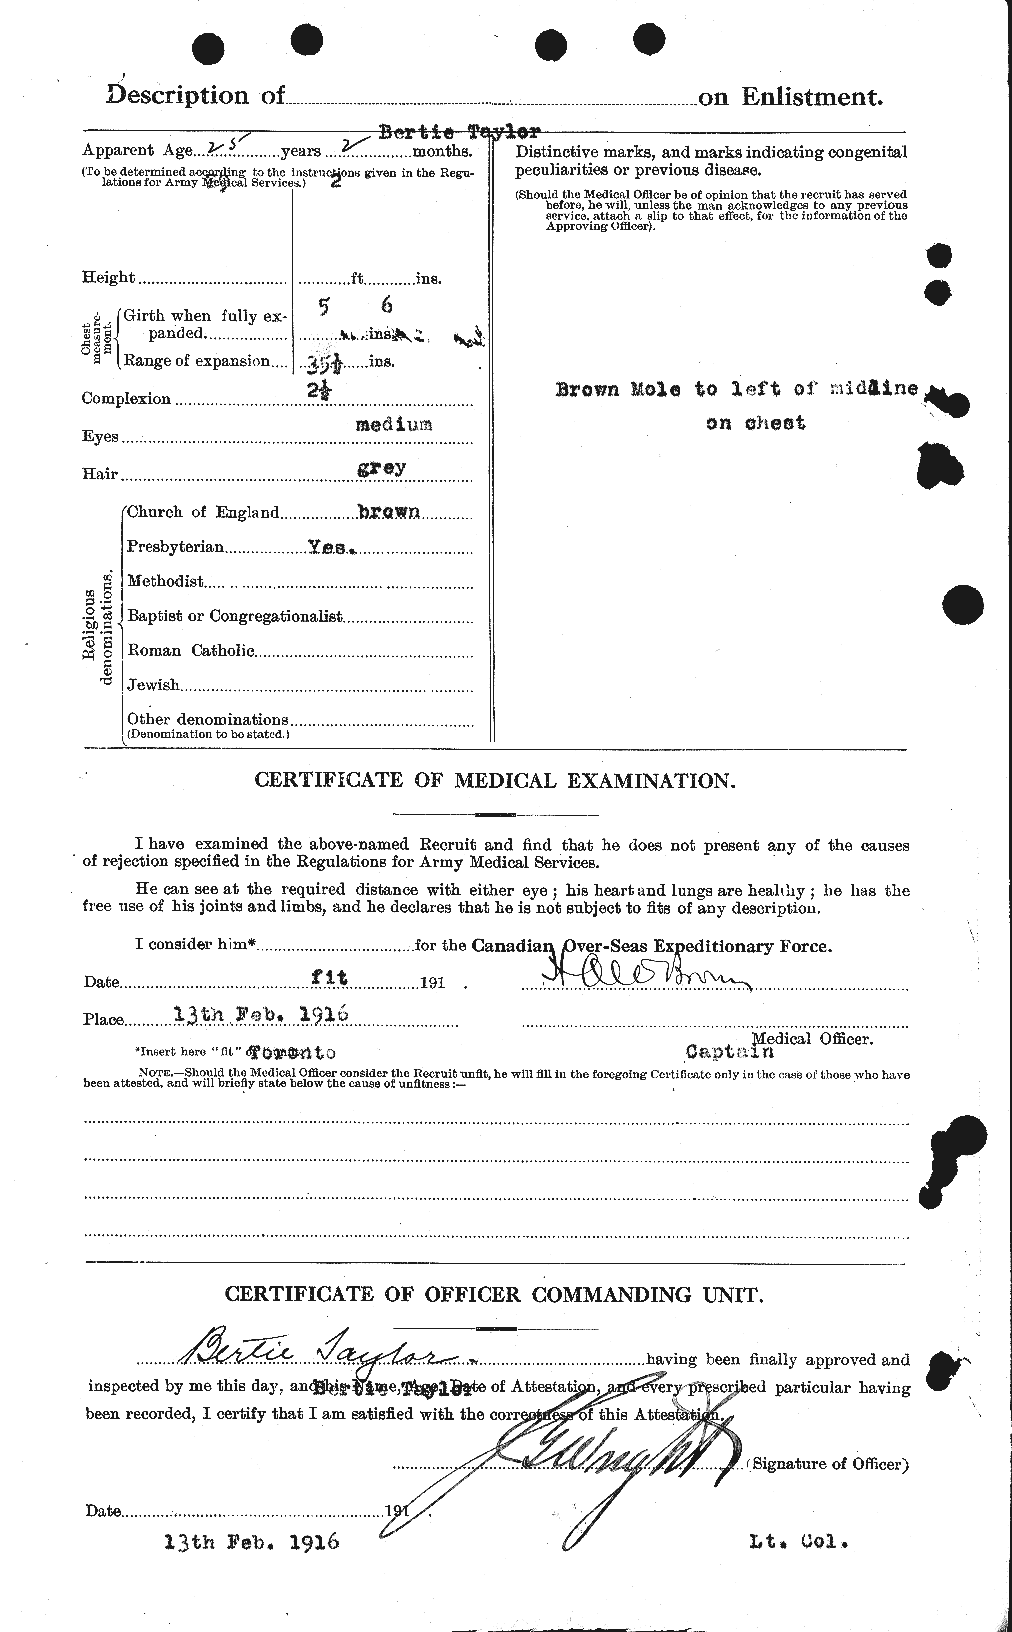 Personnel Records of the First World War - CEF 626768b